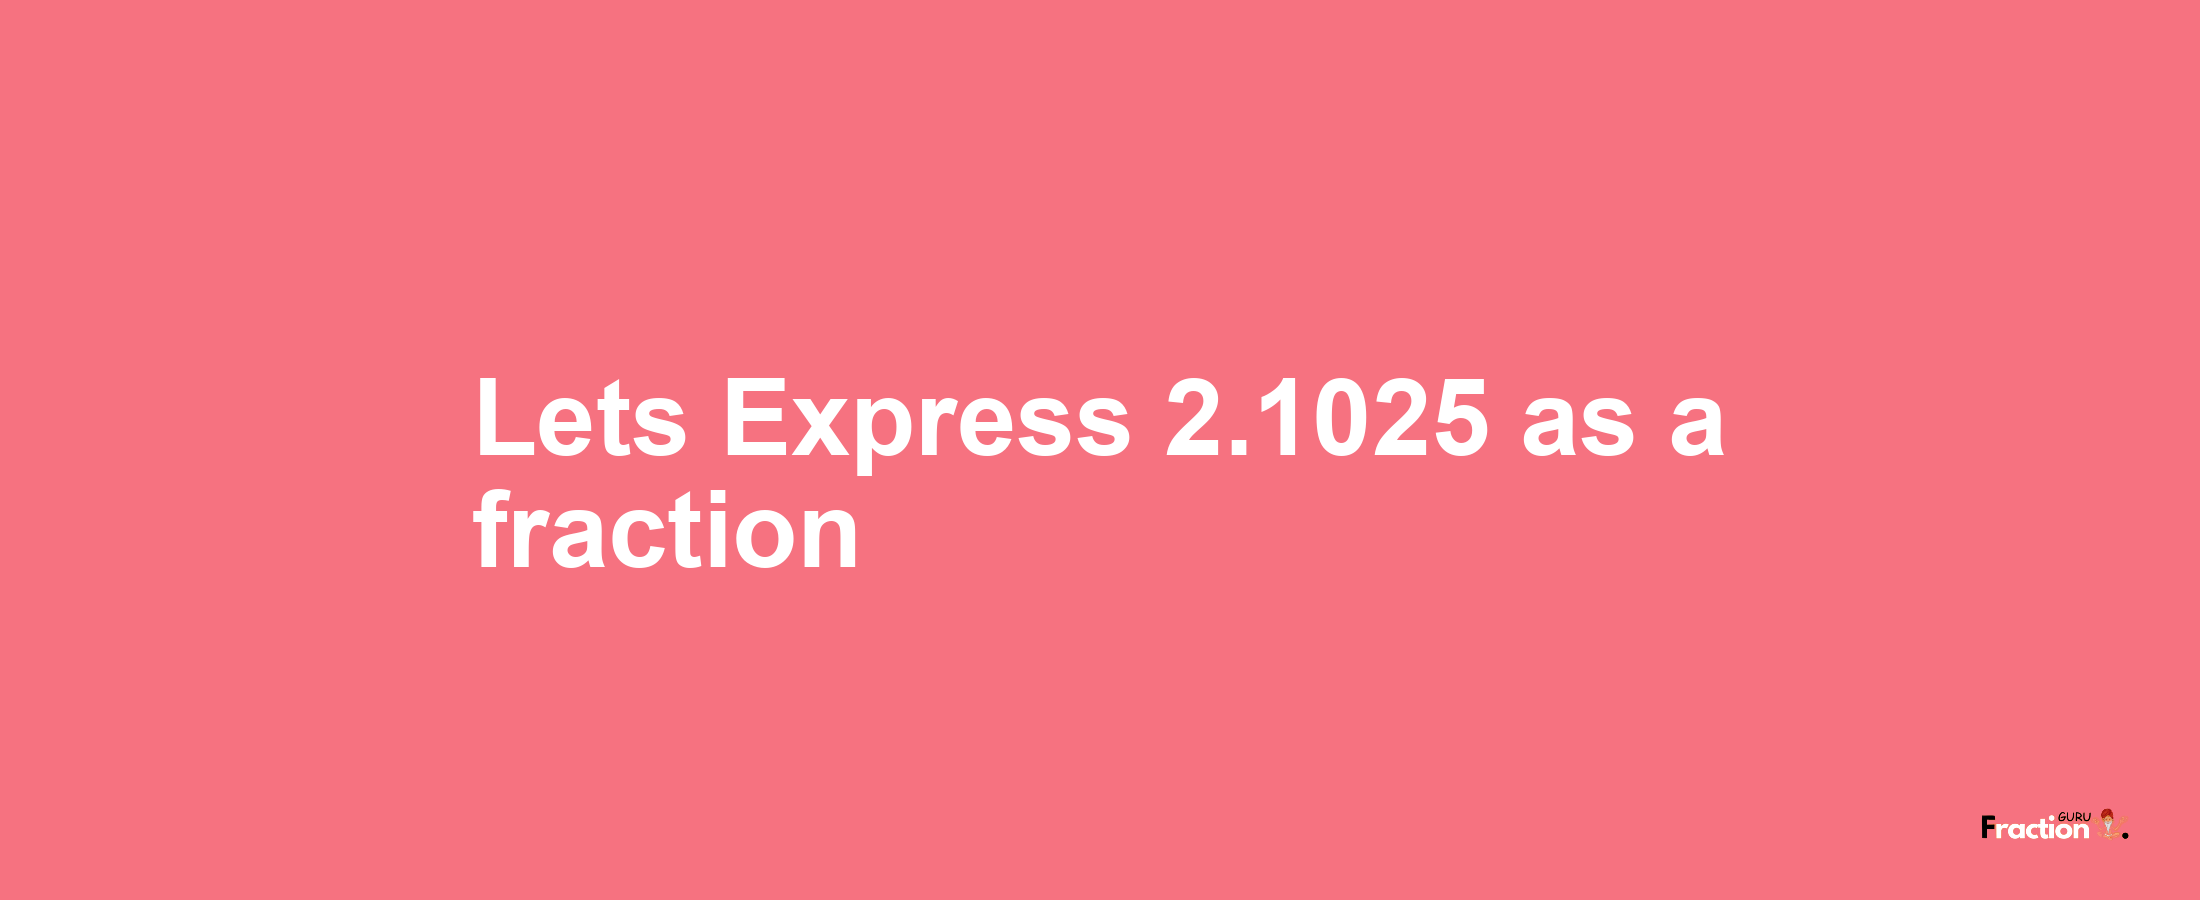 Lets Express 2.1025 as afraction